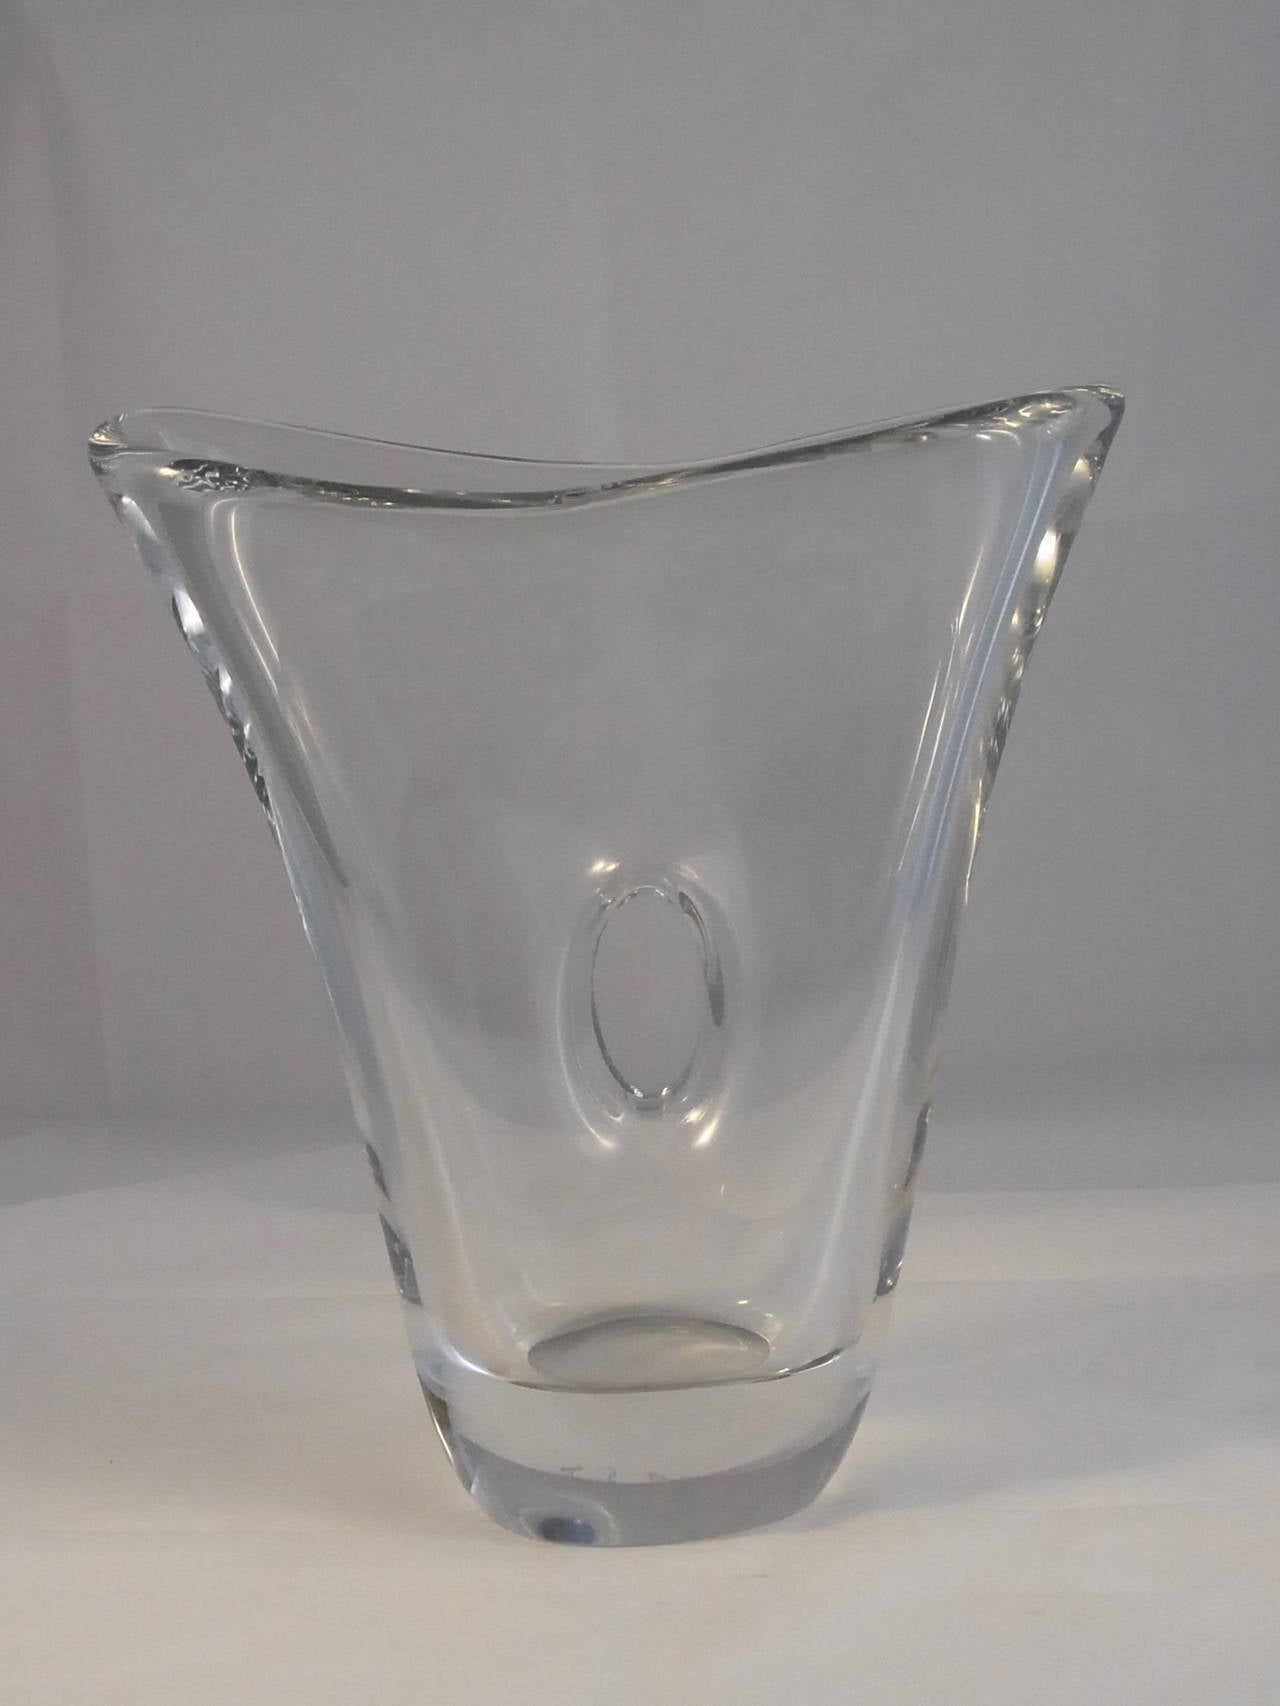 Crystal Vase by Daum France 
Nice shape with a through in the middle of vase
Signed Daum France with the Cross of Lorraine
Inscription : F.I.R.S.T